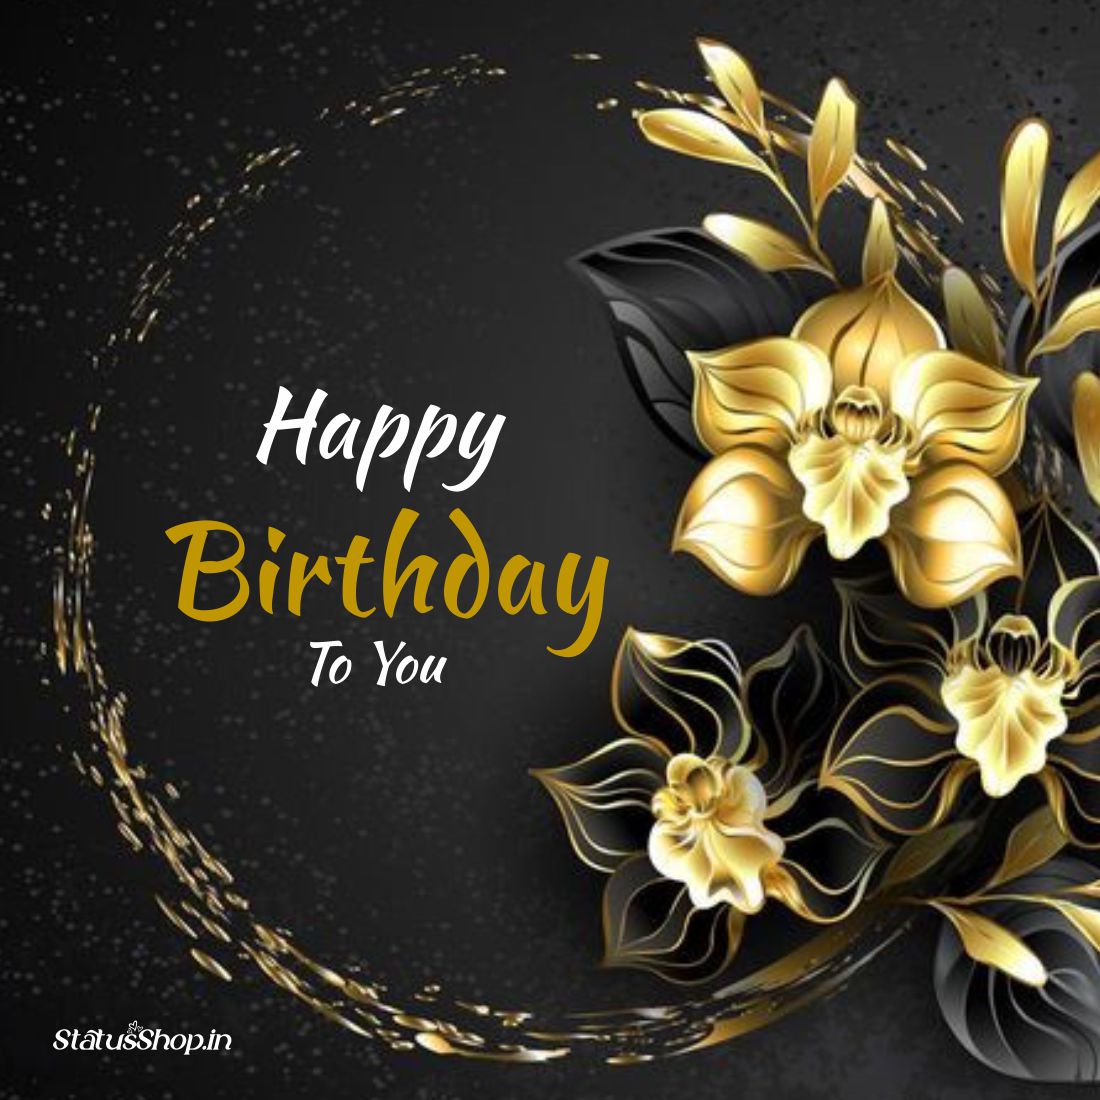 200+ Happy Birthday Wishes Images Quotes in English - Status Shop